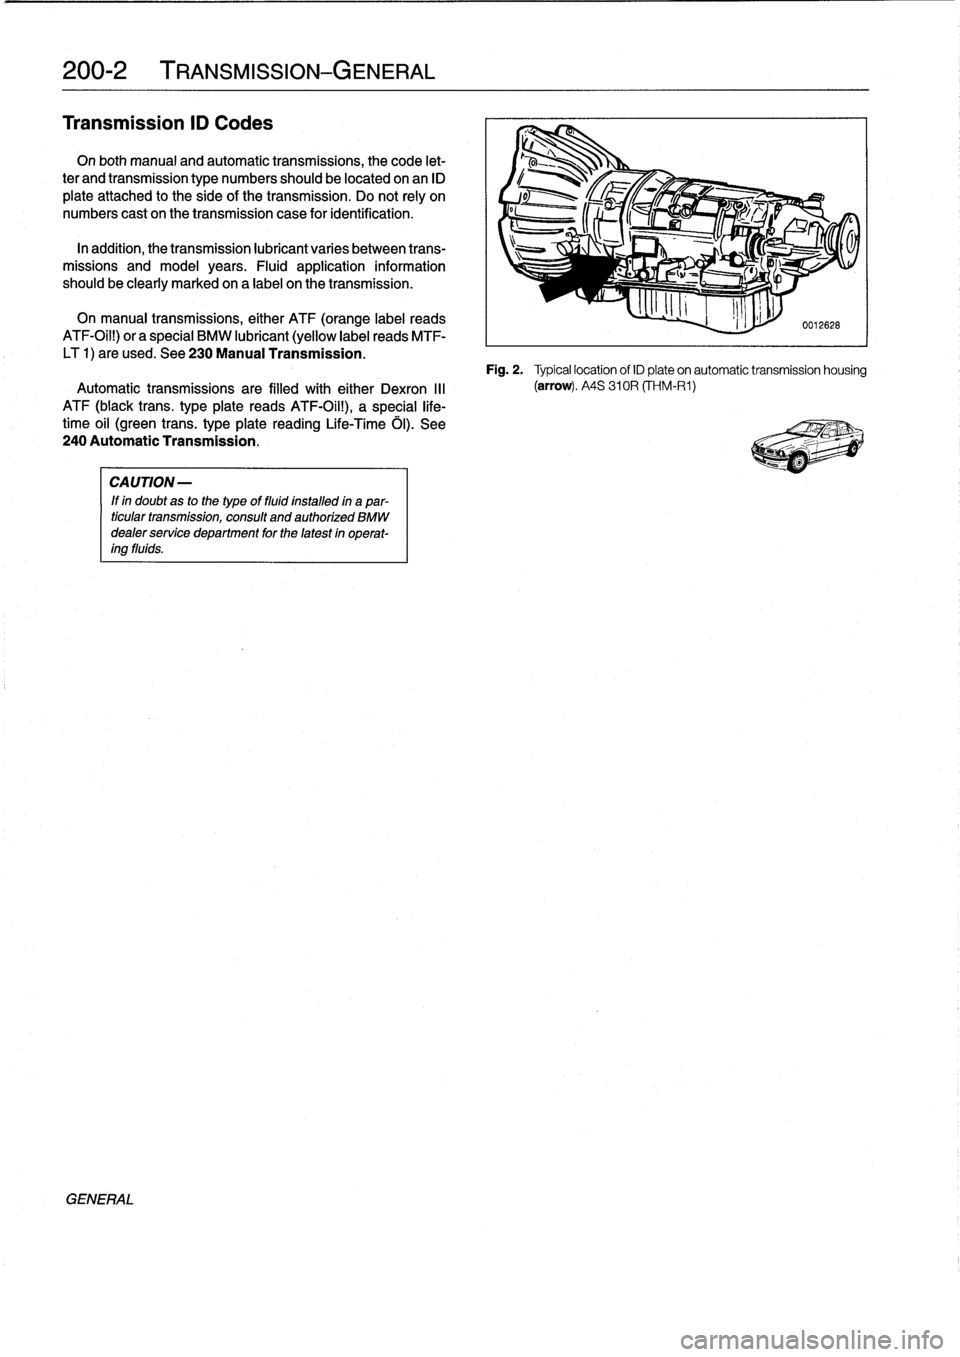 BMW M3 1996 E36 User Guide 
200-2
TRANSMISSION-GENERAL

Transmission
ID
Codes

On
both
manual
and
automatic
transmissions,
the
code
let-

ter
and
transmission
type
numbers
should
be
located
onan
ID

plate
attached
to
the
síde
